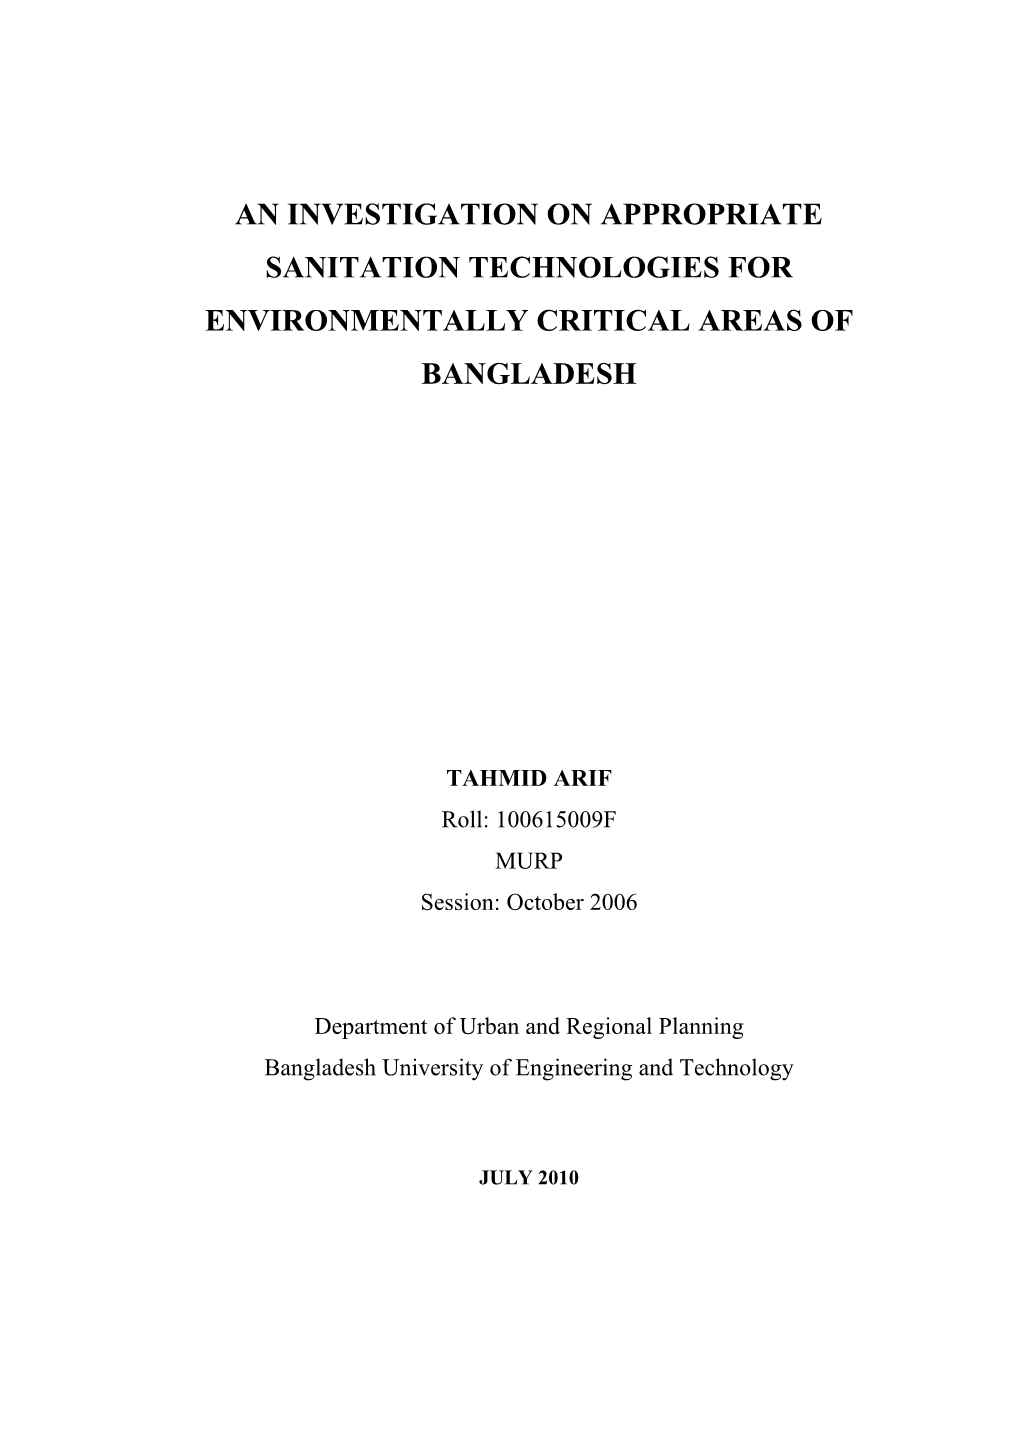 An Investigation on Appropriate Sanitation Technologies for Environmentally Critical Areas of Bangladesh